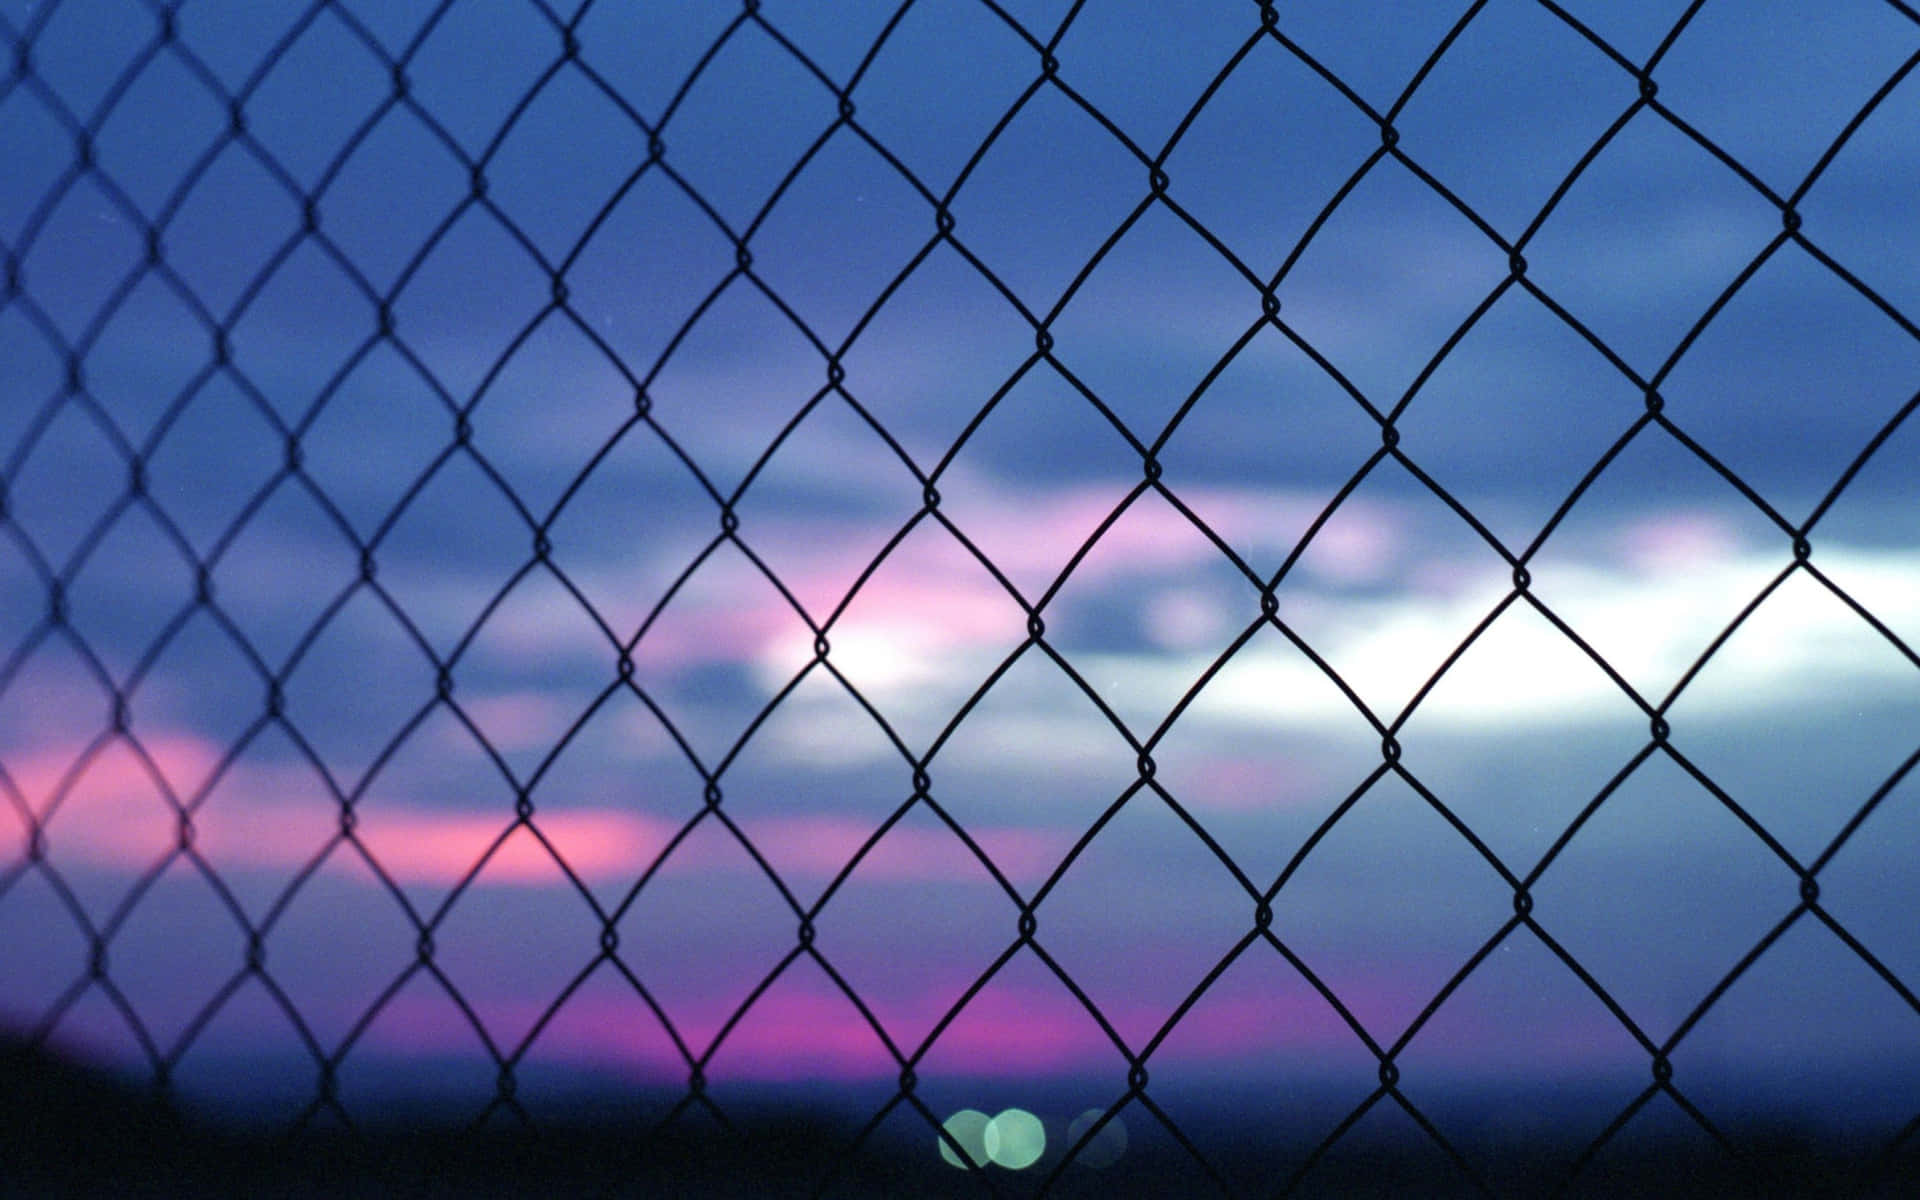 A Fence With A View Of The Sky